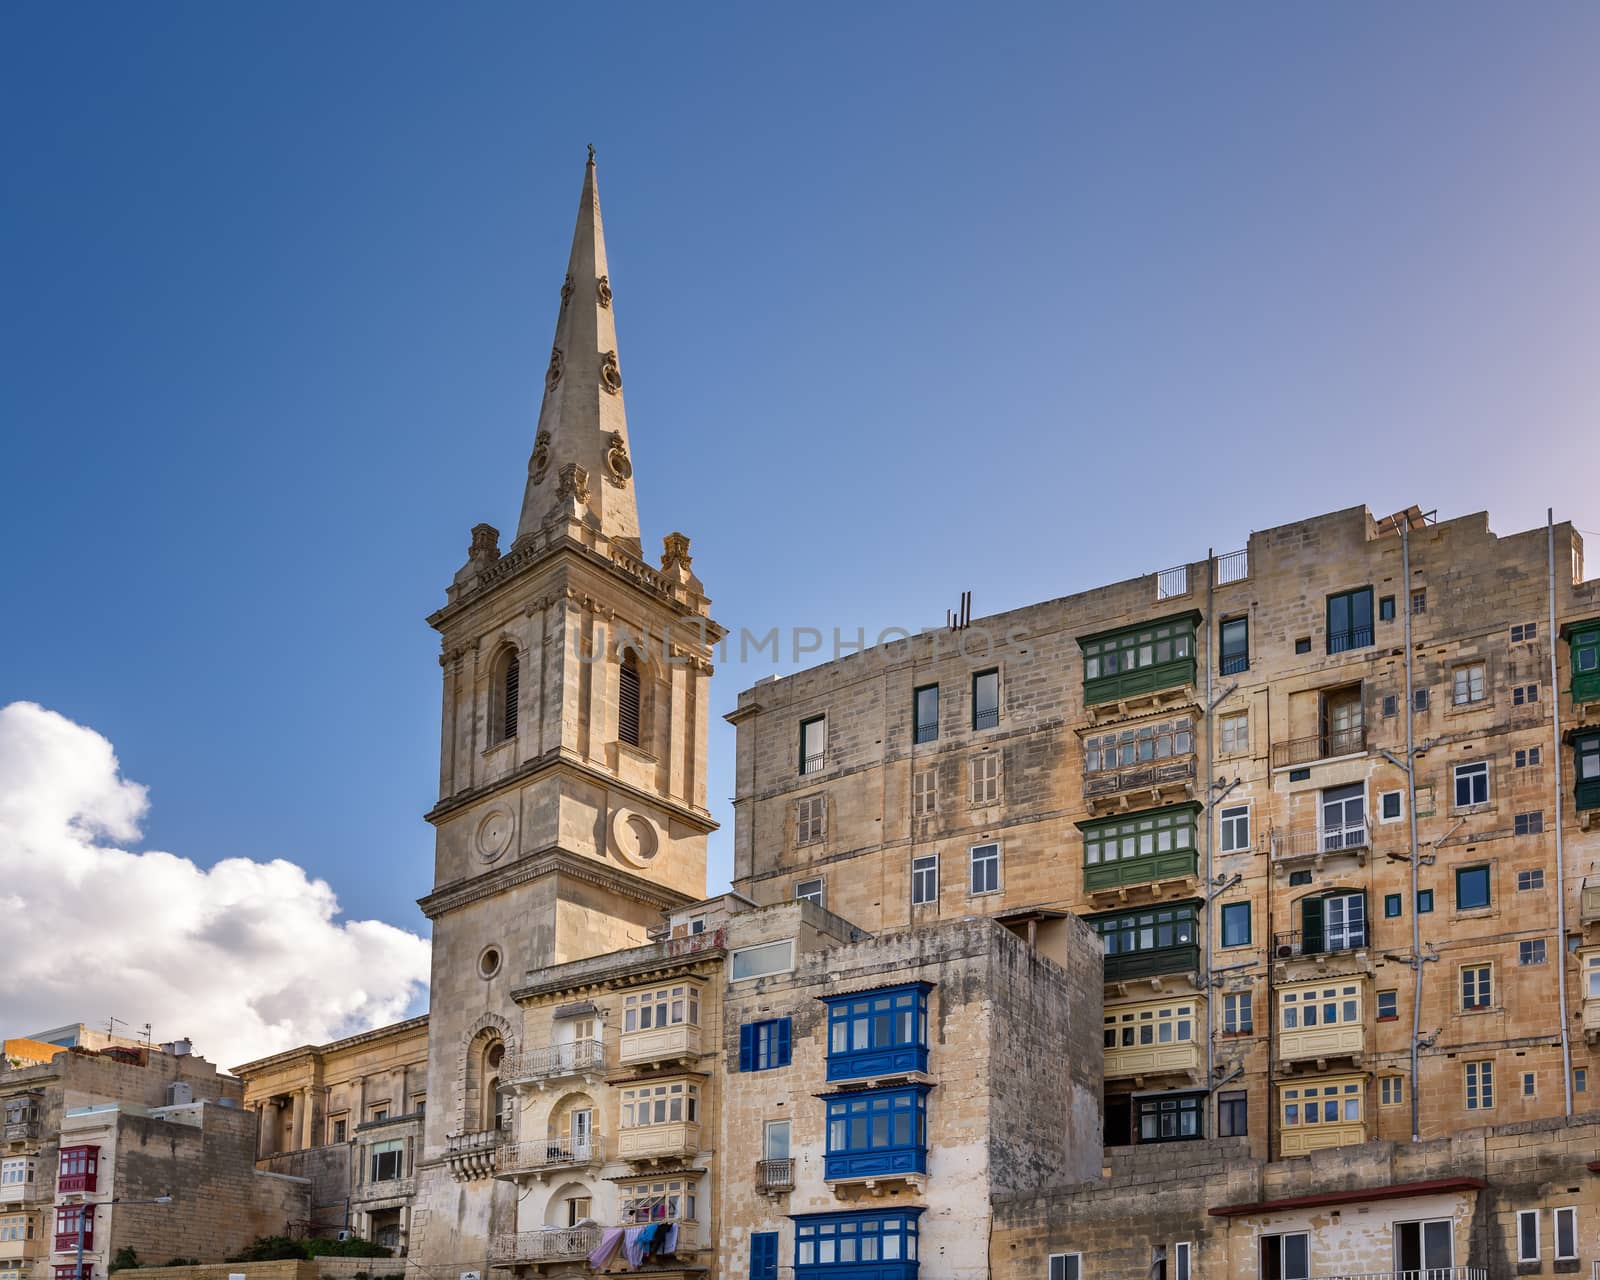 Saint Paul's Anglican Cathedral in Valletta, Malta by anshar